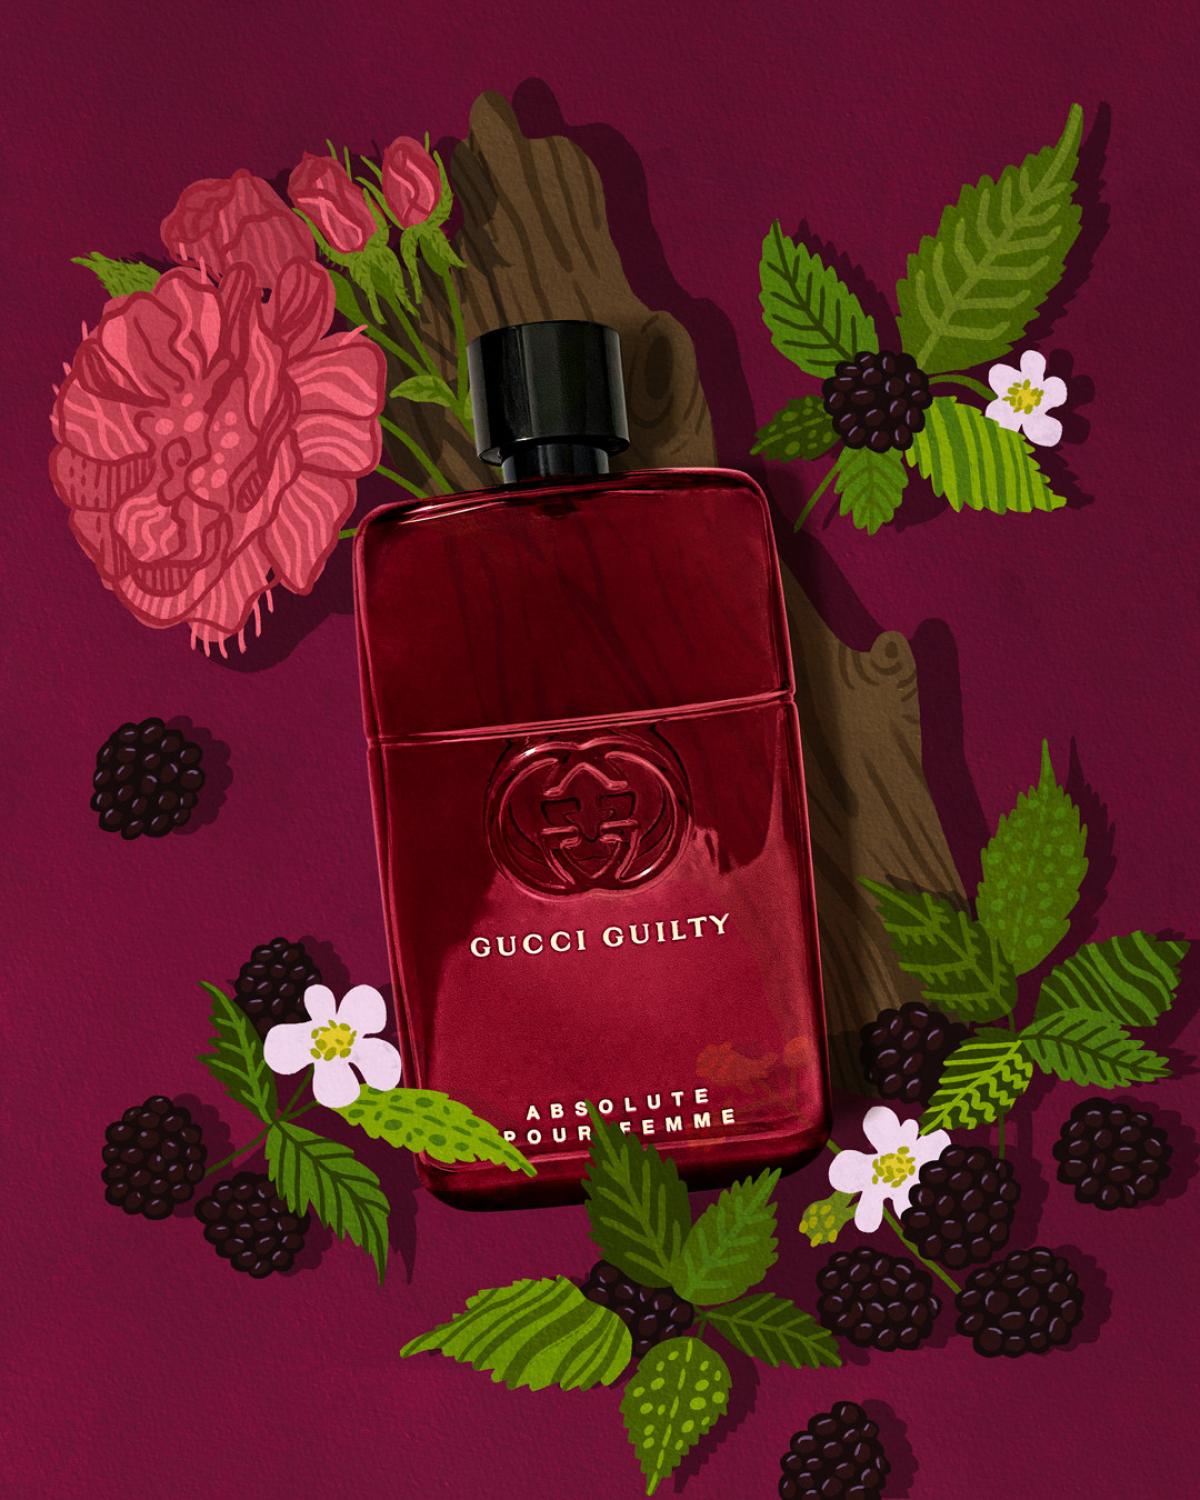 Gucci guilty absolute pour. Gucci guilty absolute pour femme,90 мл. Gucci guilty absolute pour femme. Духи Gucci guilty absolute. Gucci guilty absolute pour femme EDP 50ml.